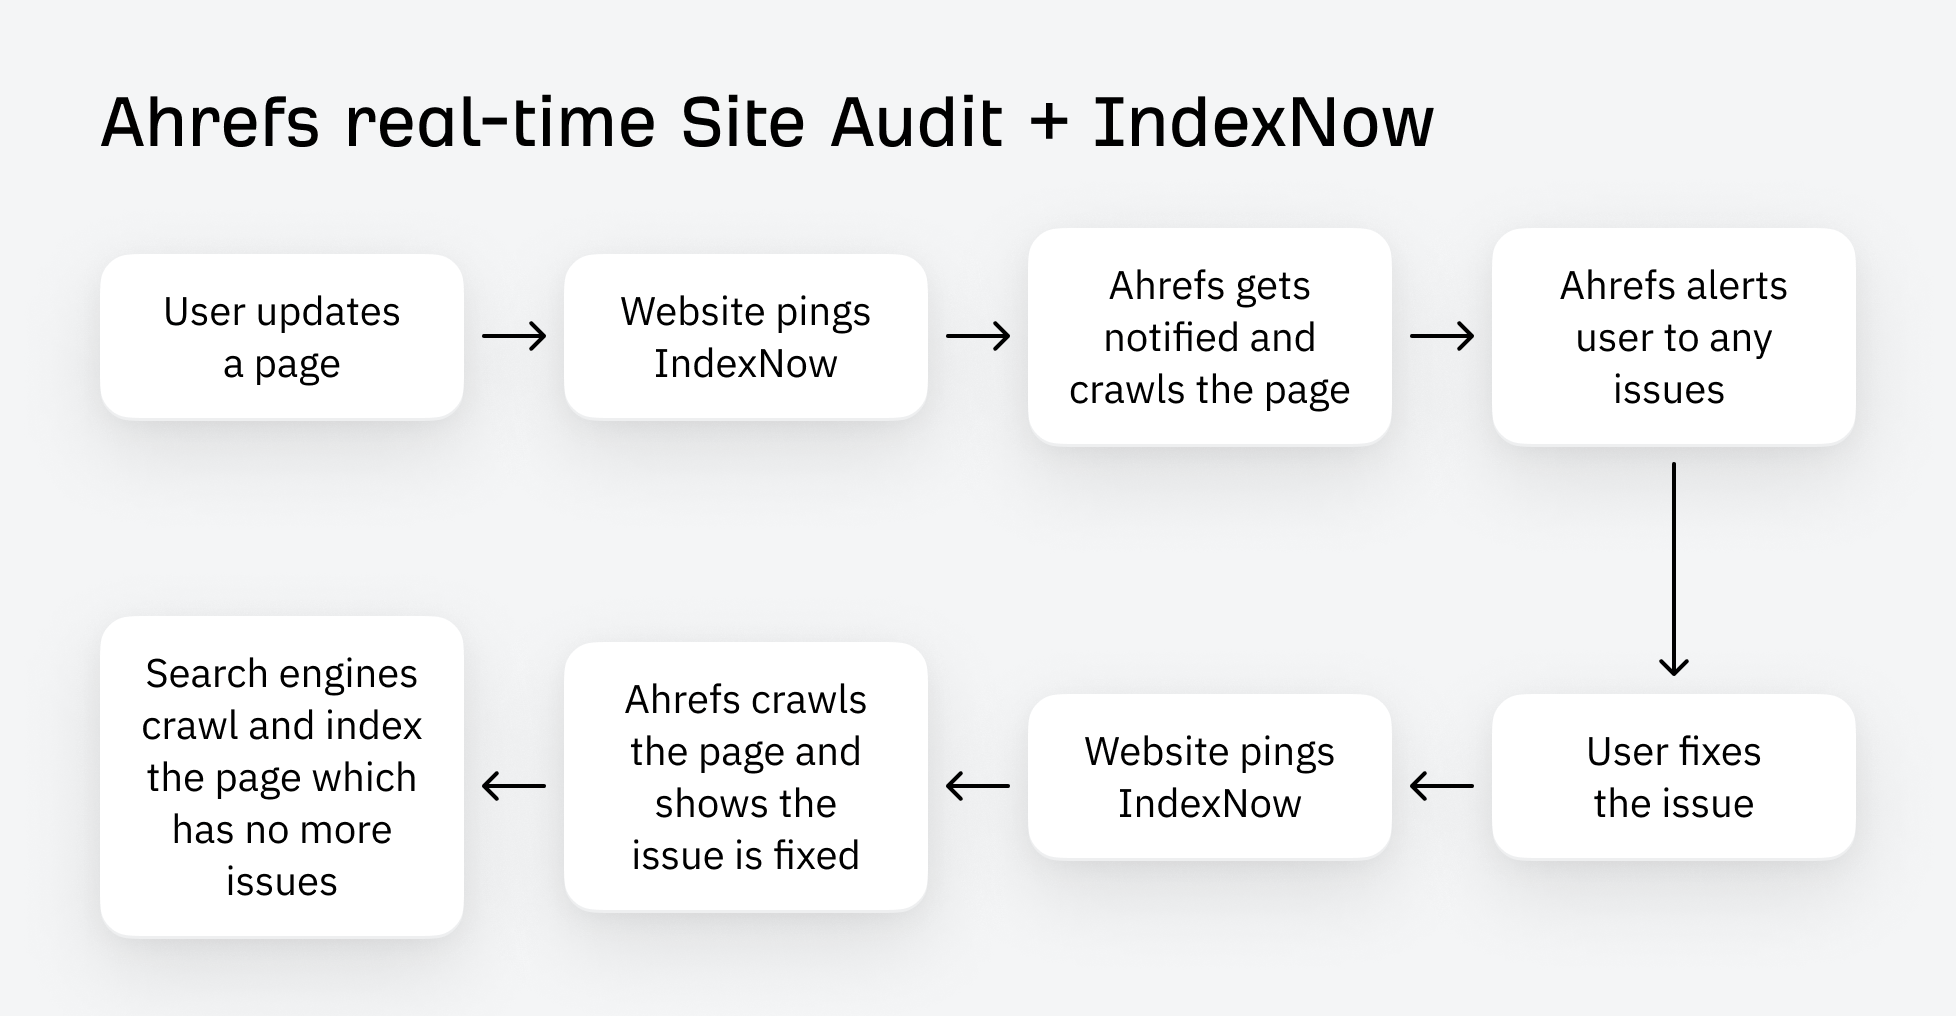 How Ahrefs' real-time site audit will work with IndexNow